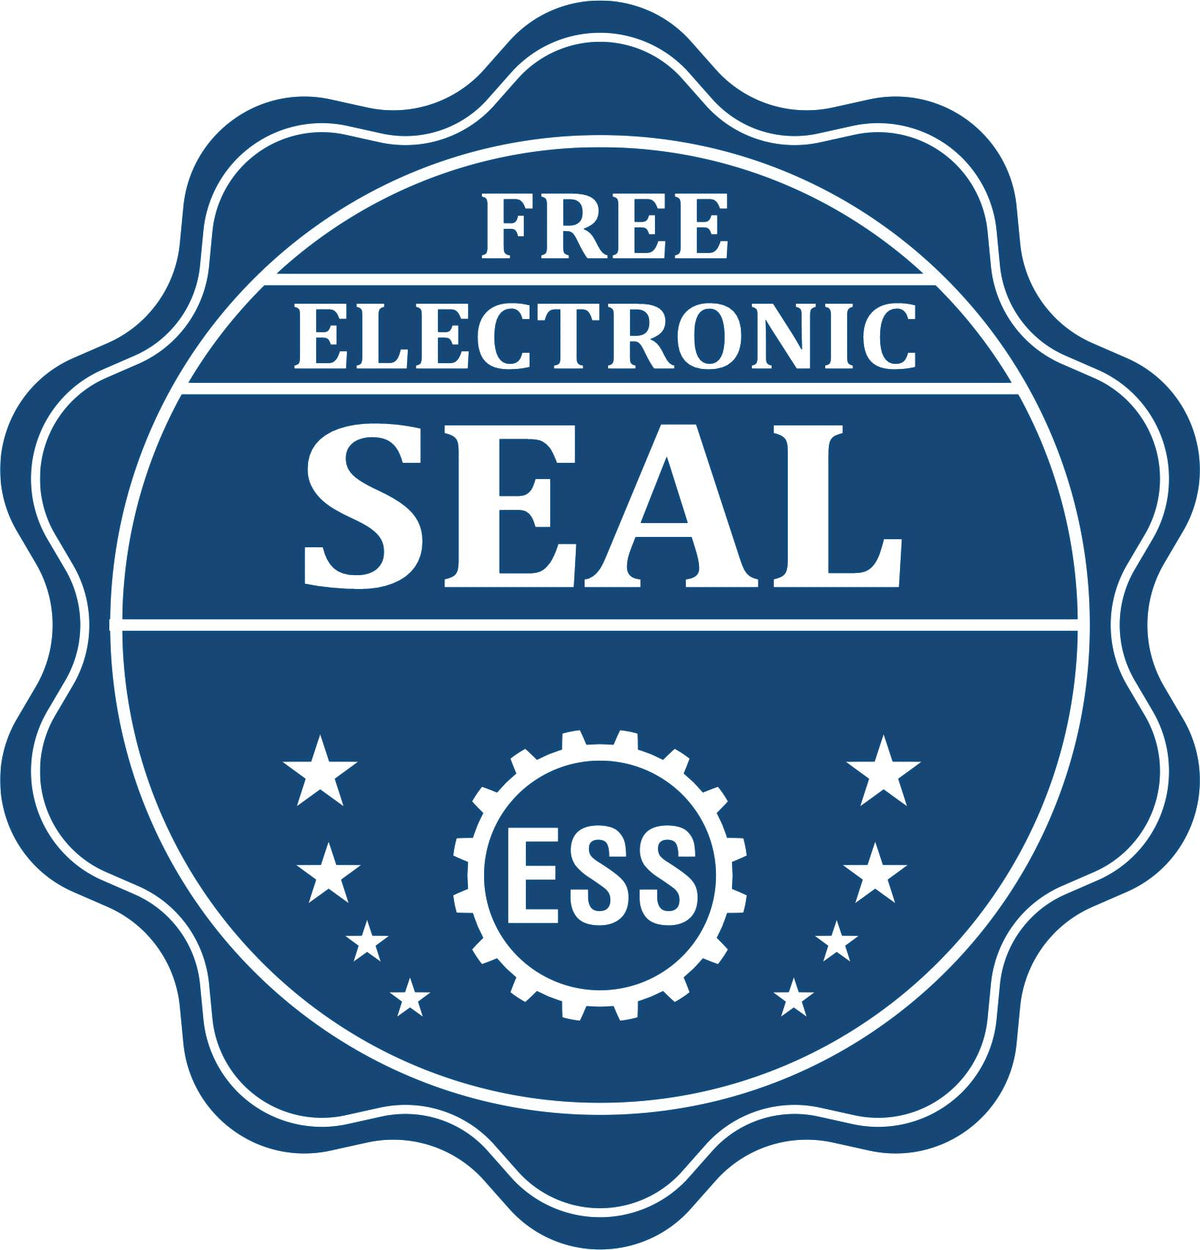 A badge showing a free electronic seal for the Maryland Desk Architect Embossing Seal with stars and the ESS gear on the emblem.